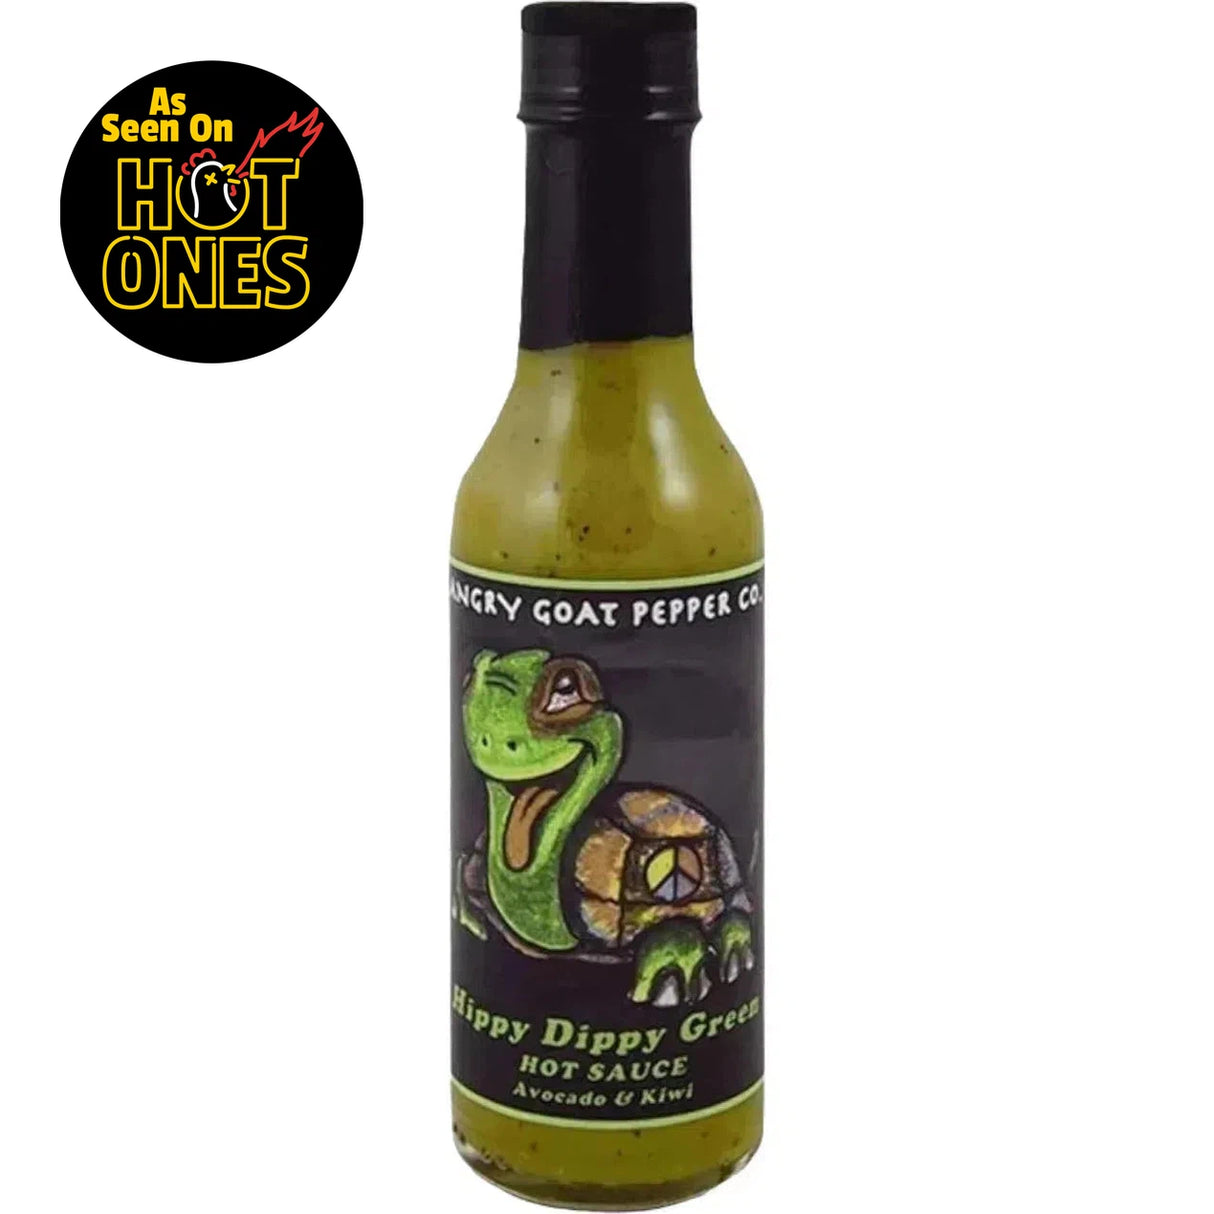 Angry Goat Pepper Co - Hippy Dippy Green Hot Sauce - As Seen on Hot Ones